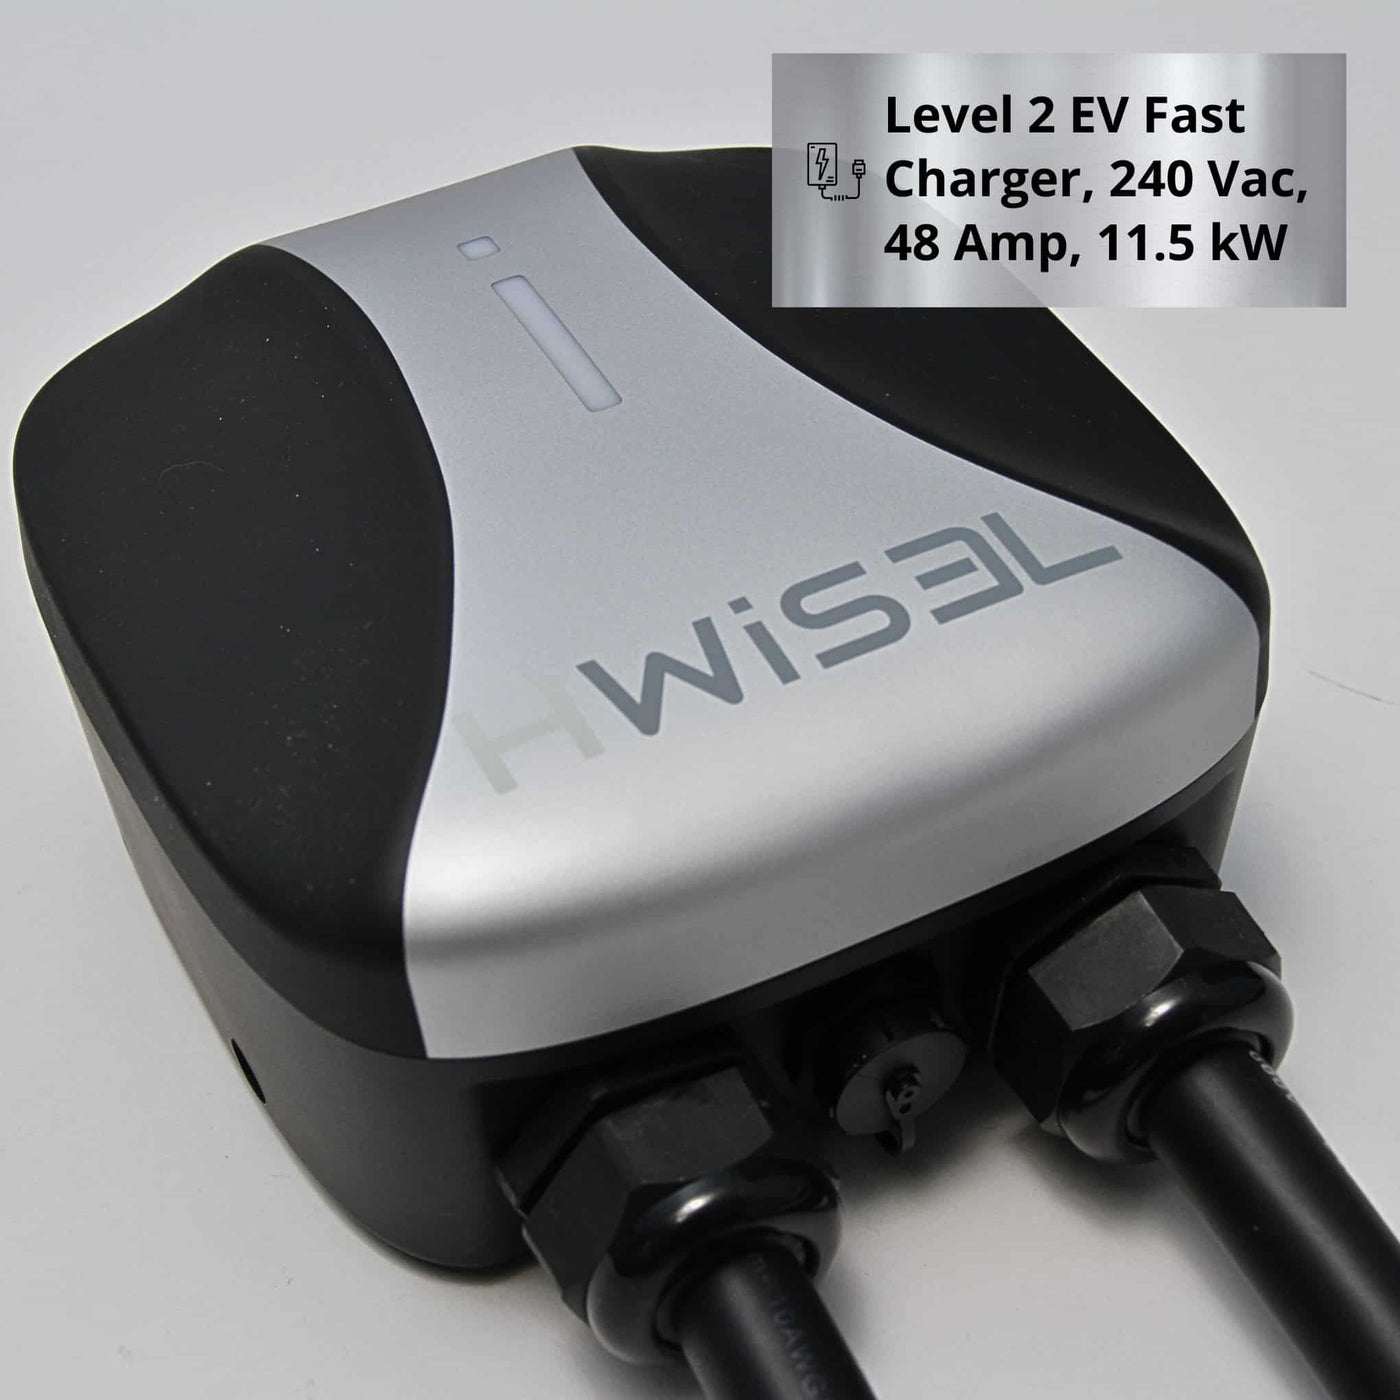 Charger Vip Plan_ HWisel HEVC19 Smart Charging Station Image Level 2 Fast Charger 240 Vac, 48 amp, 11.5 kW Image Size 2040x2040